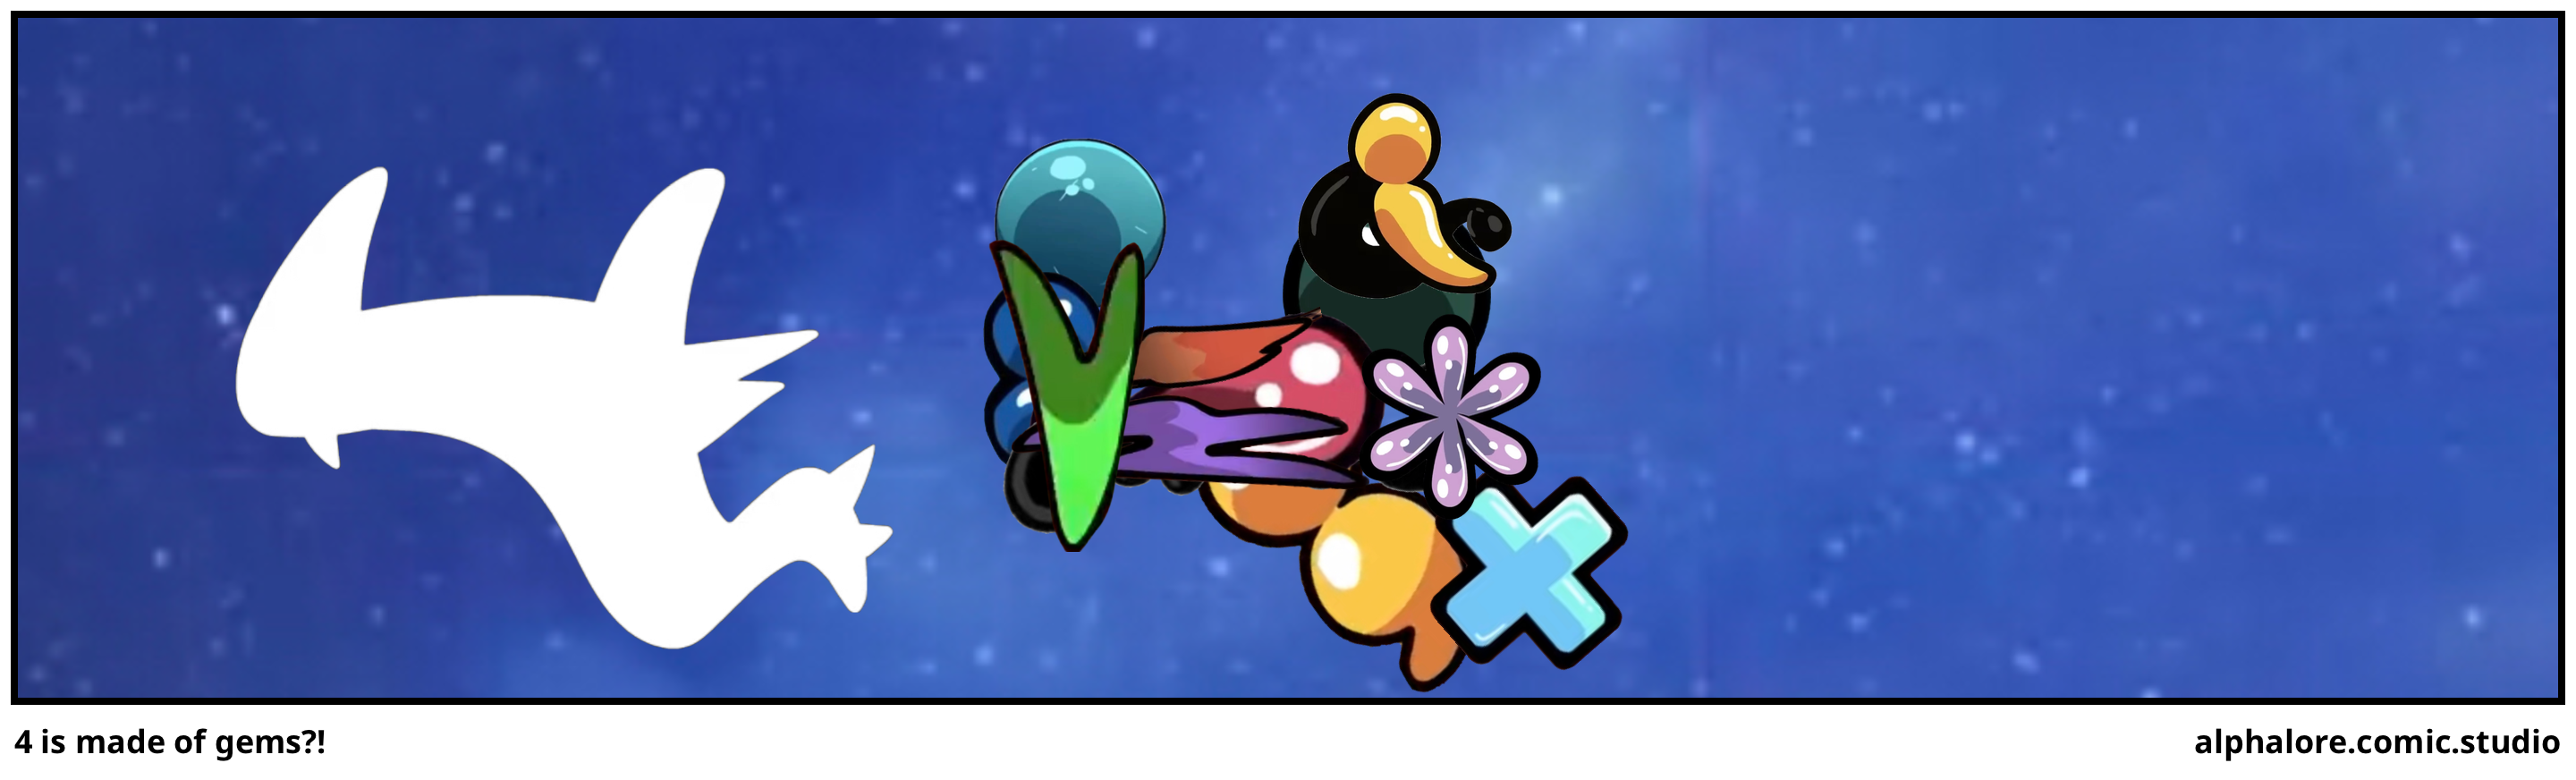 4 is made of gems?!